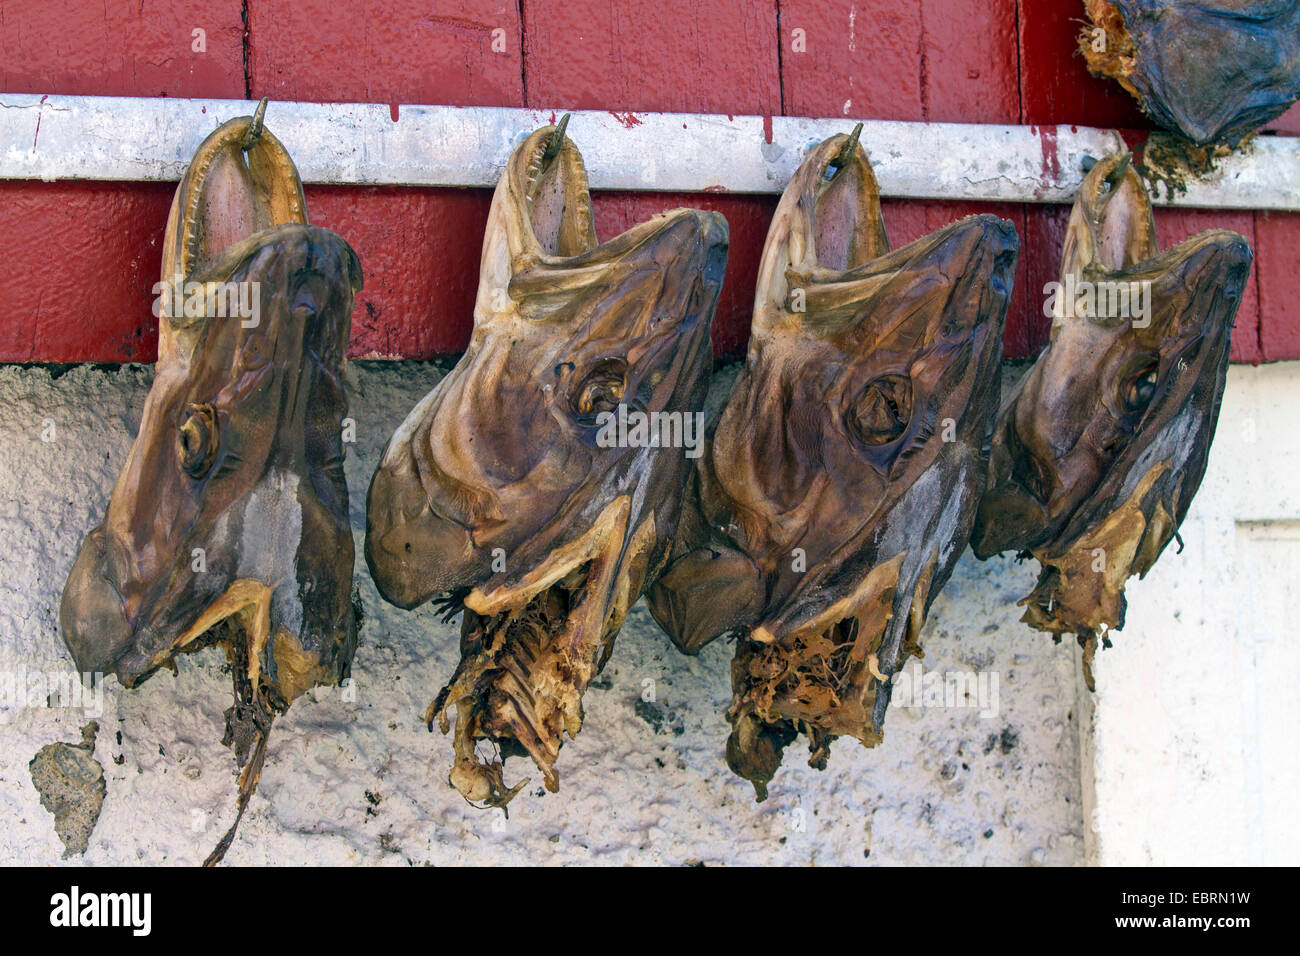 Atlantic wolffish, wolffish, cat fish, catfish (Anarhichas lupus), some dried heads as trophies at the wall of a boathouse, Norway, Hitra Stock Photo